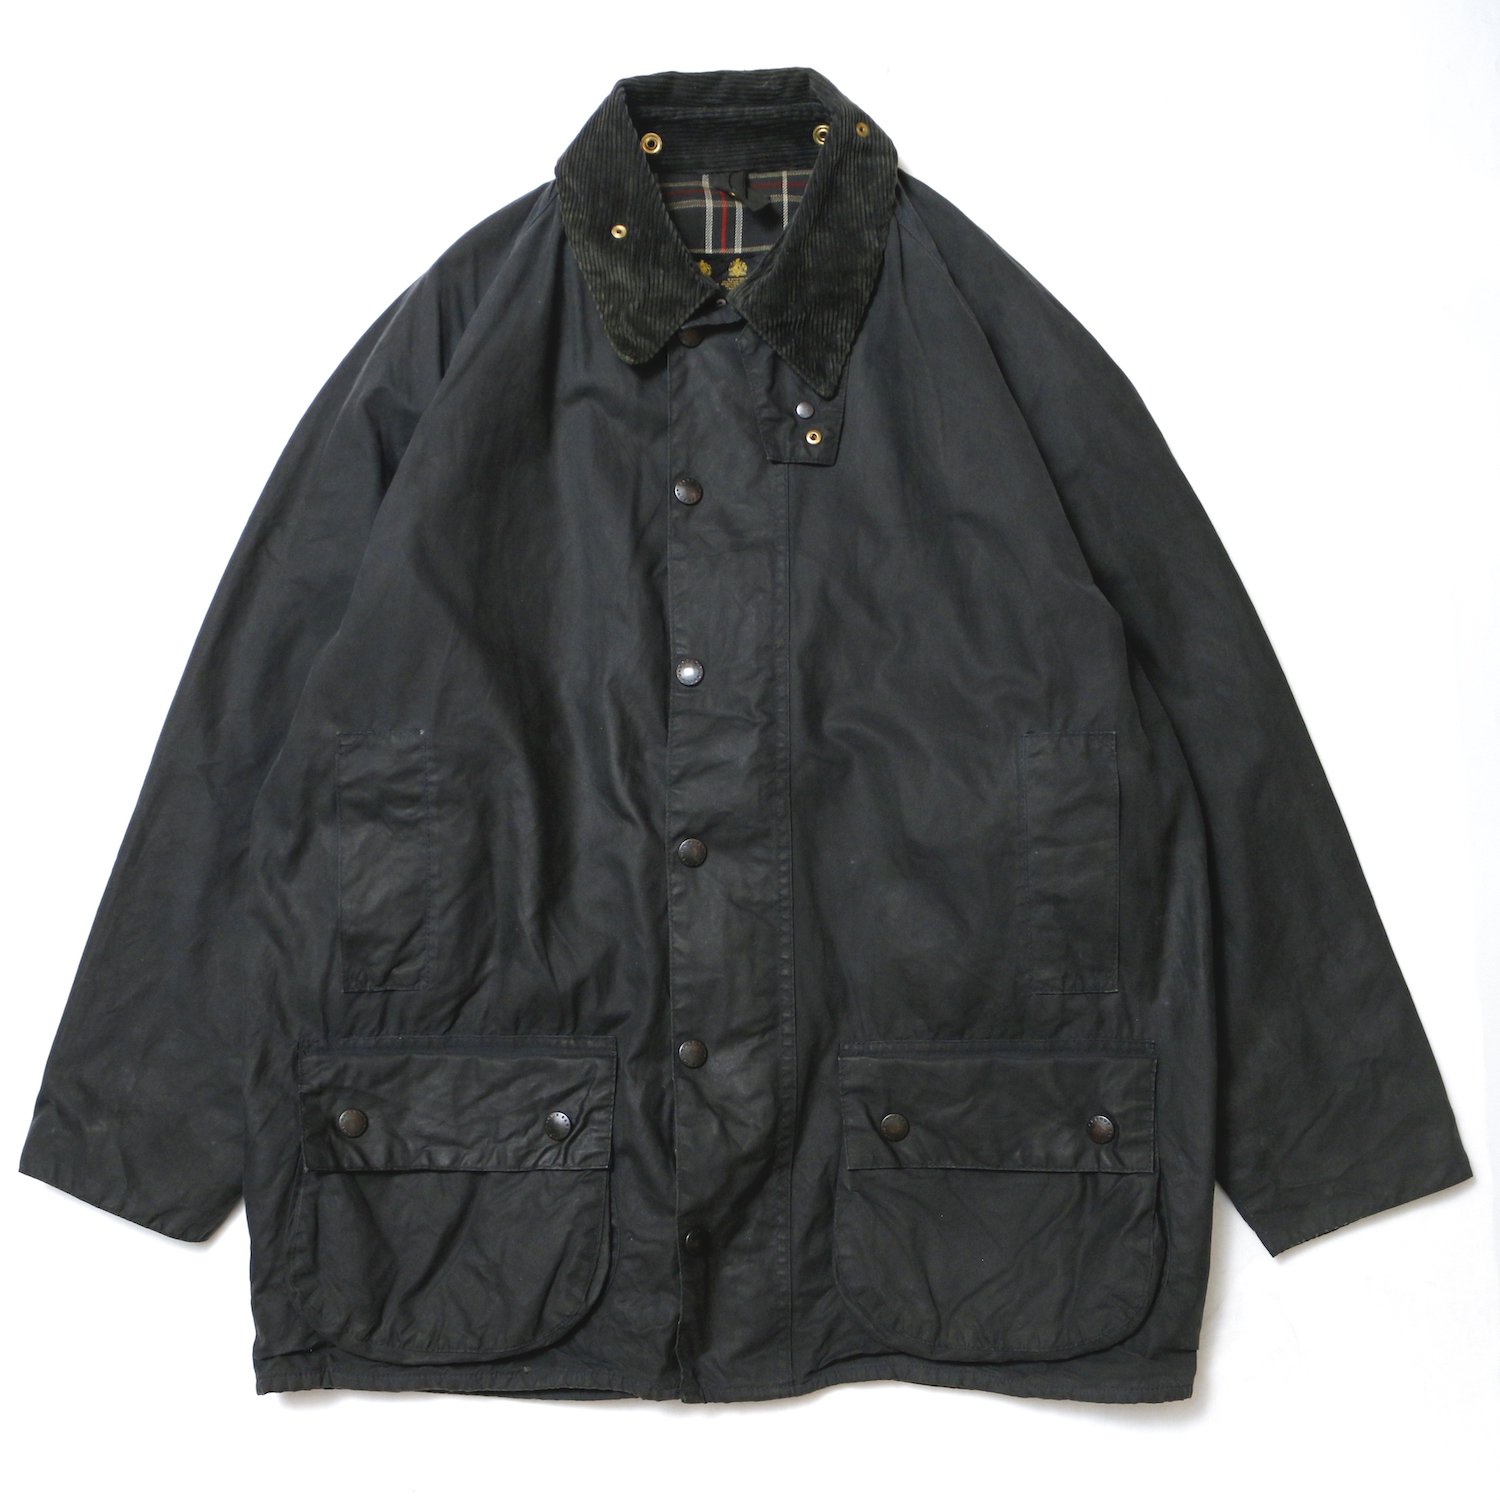 Barbour バブアー / Vintage Beaufort ヴィンテージビーフォート Navy